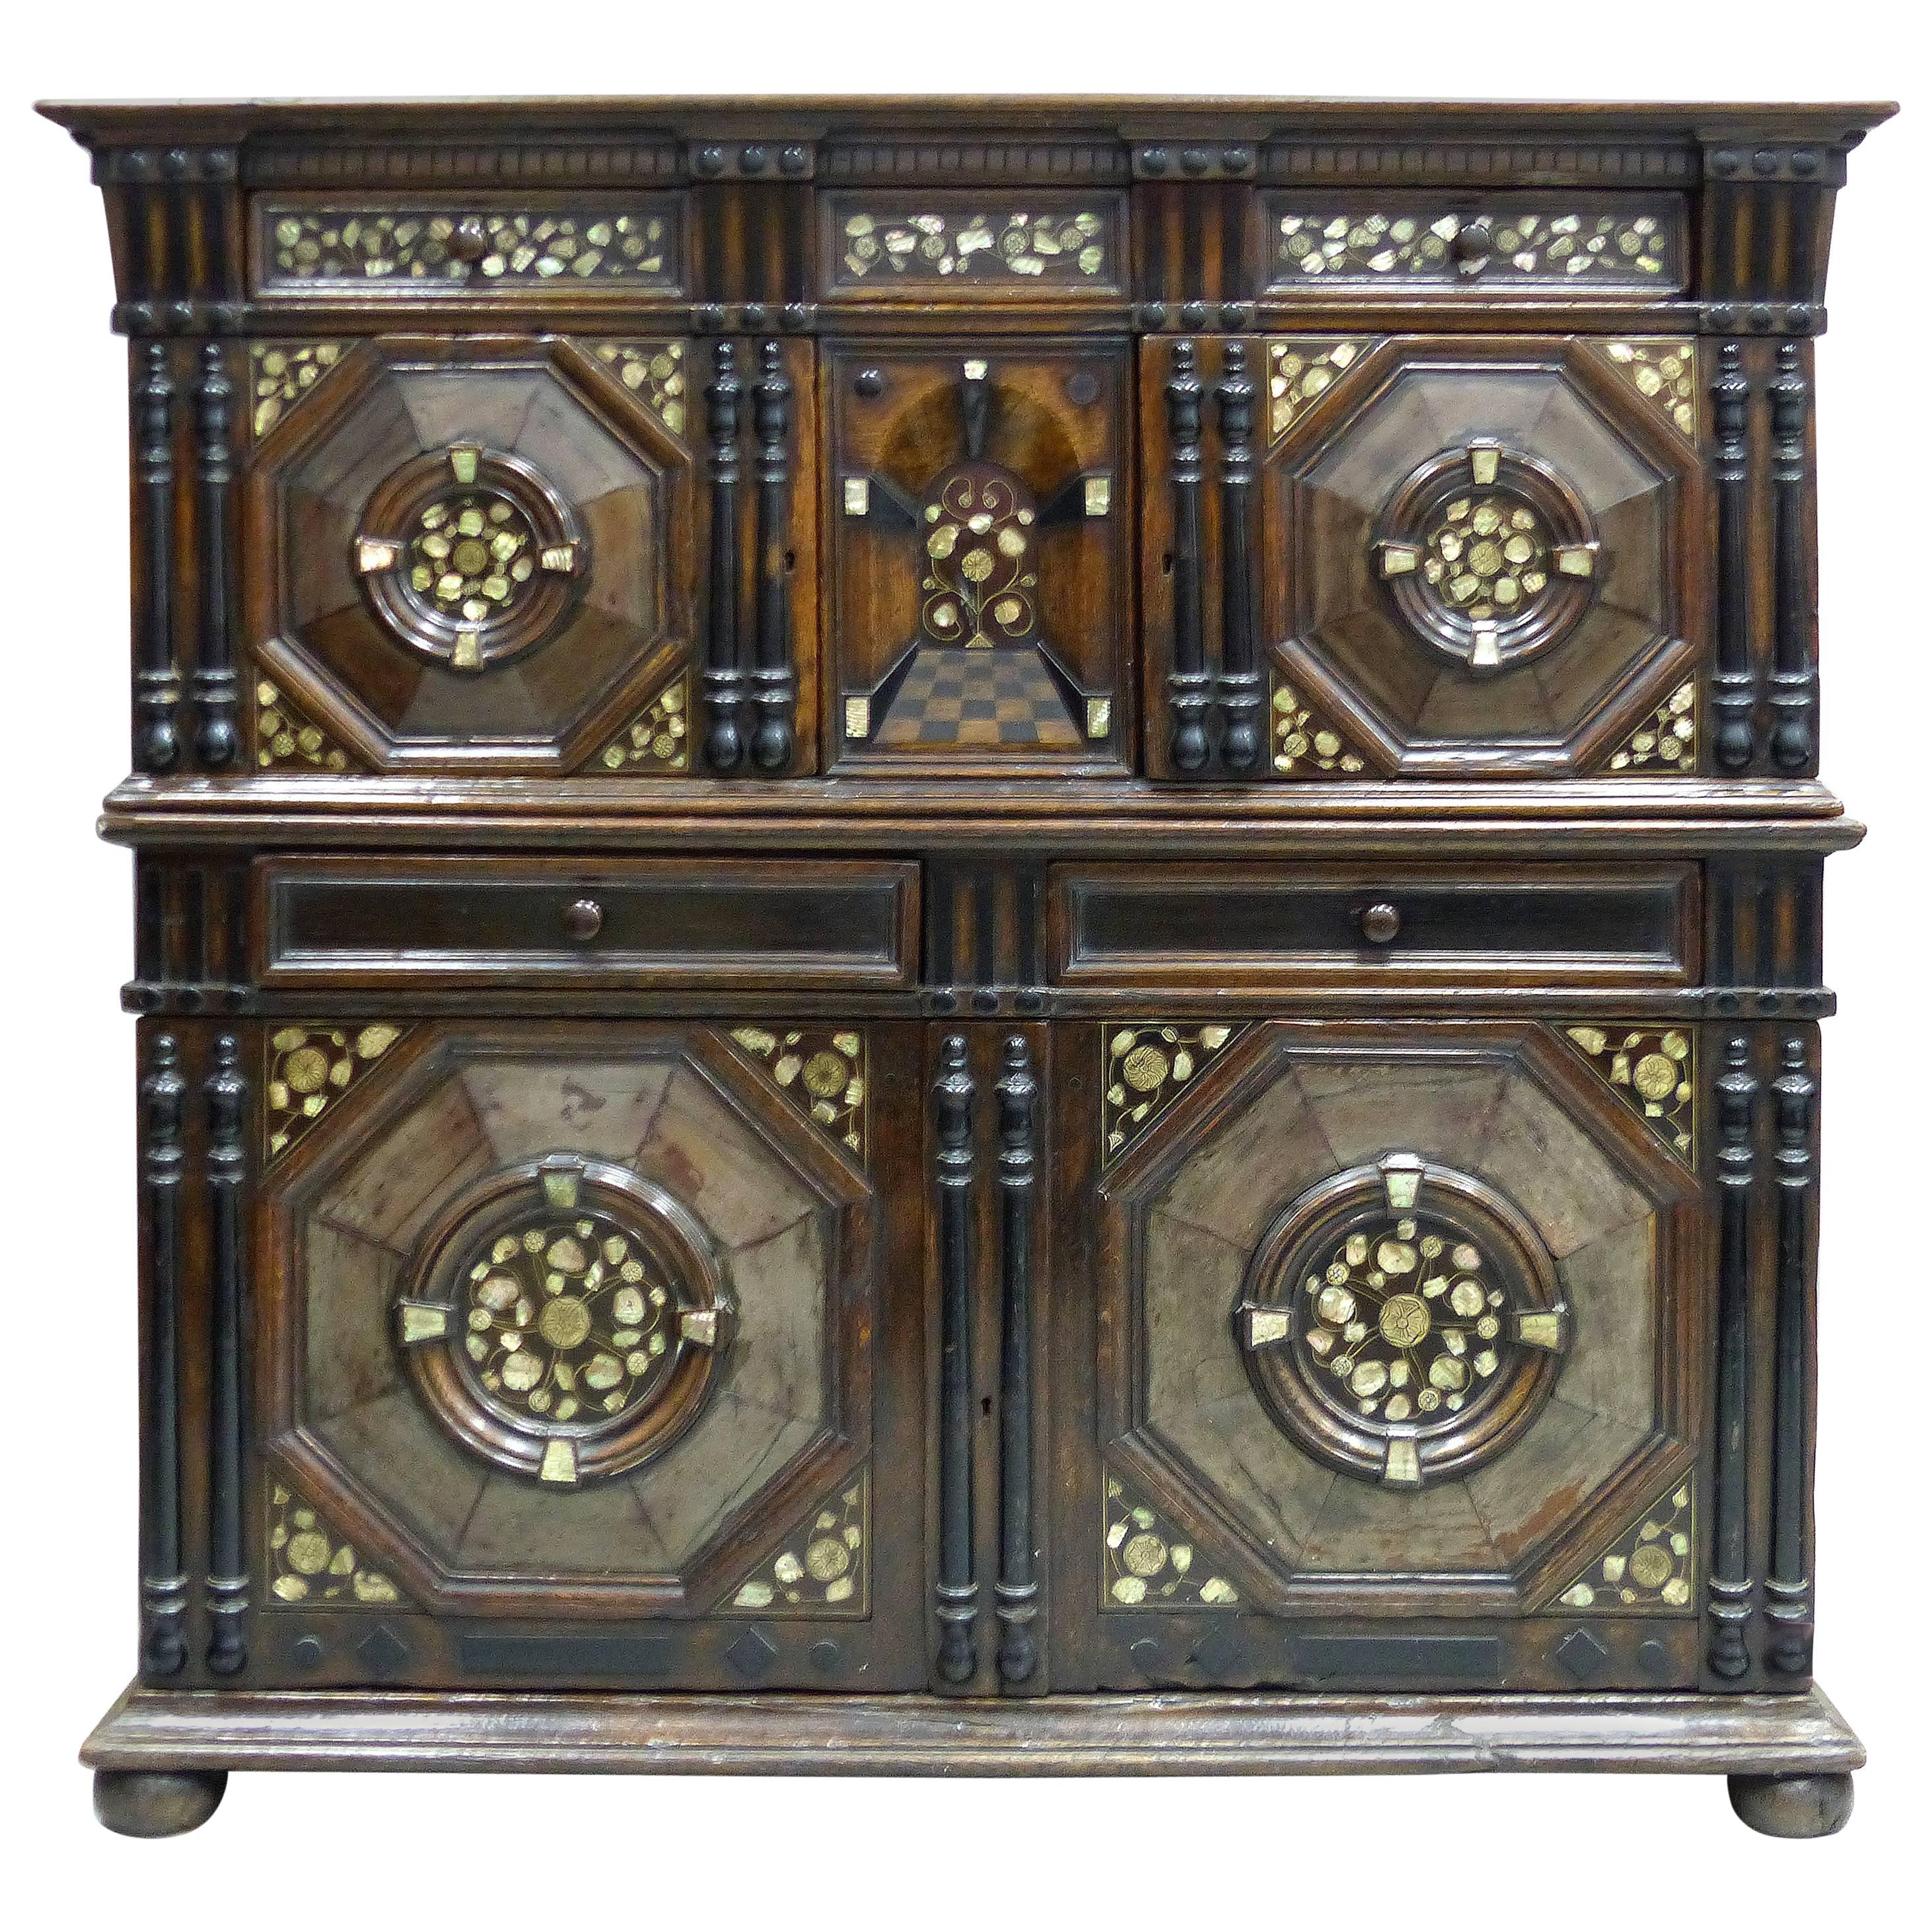 Restoration Charles II English Cabinet circa 1660-1685, Mother-of-Pearl Inlays